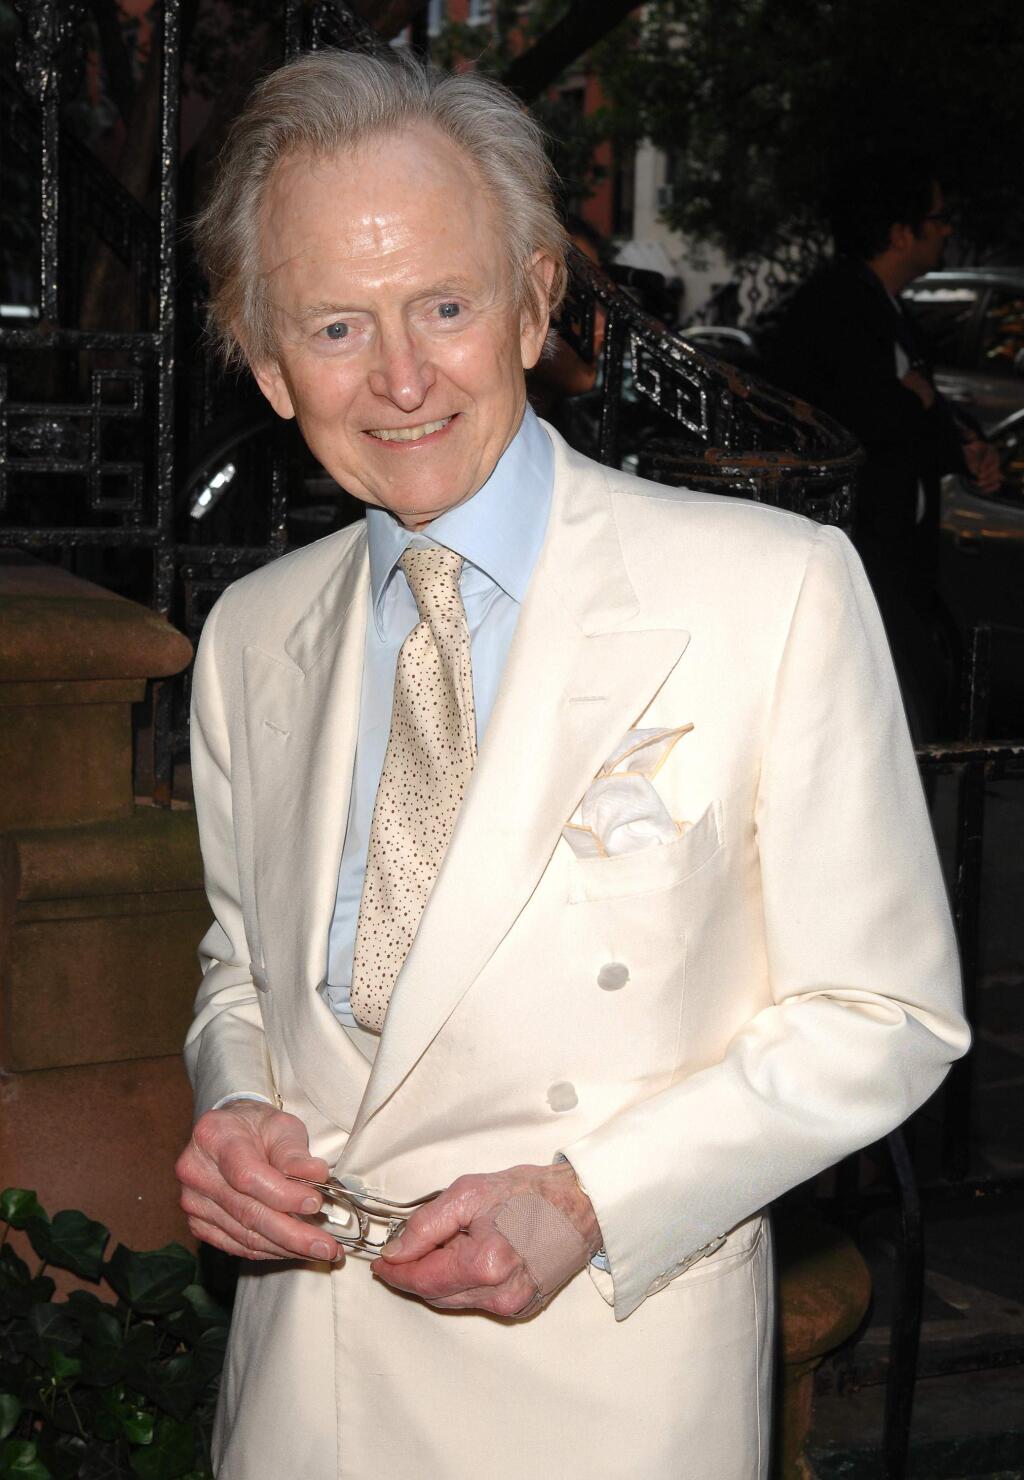 FILE - In this June 25, 2008 file photo, author Tom Wolfe arrives to a special screening of 'Gonzo: The Life and Work of Dr. Hunter S. Thompson' in New York. Wolfe died at a New York City hospital. He was 87. Additional details were not immediately available. (AP Photo/Peter Kramer, File)